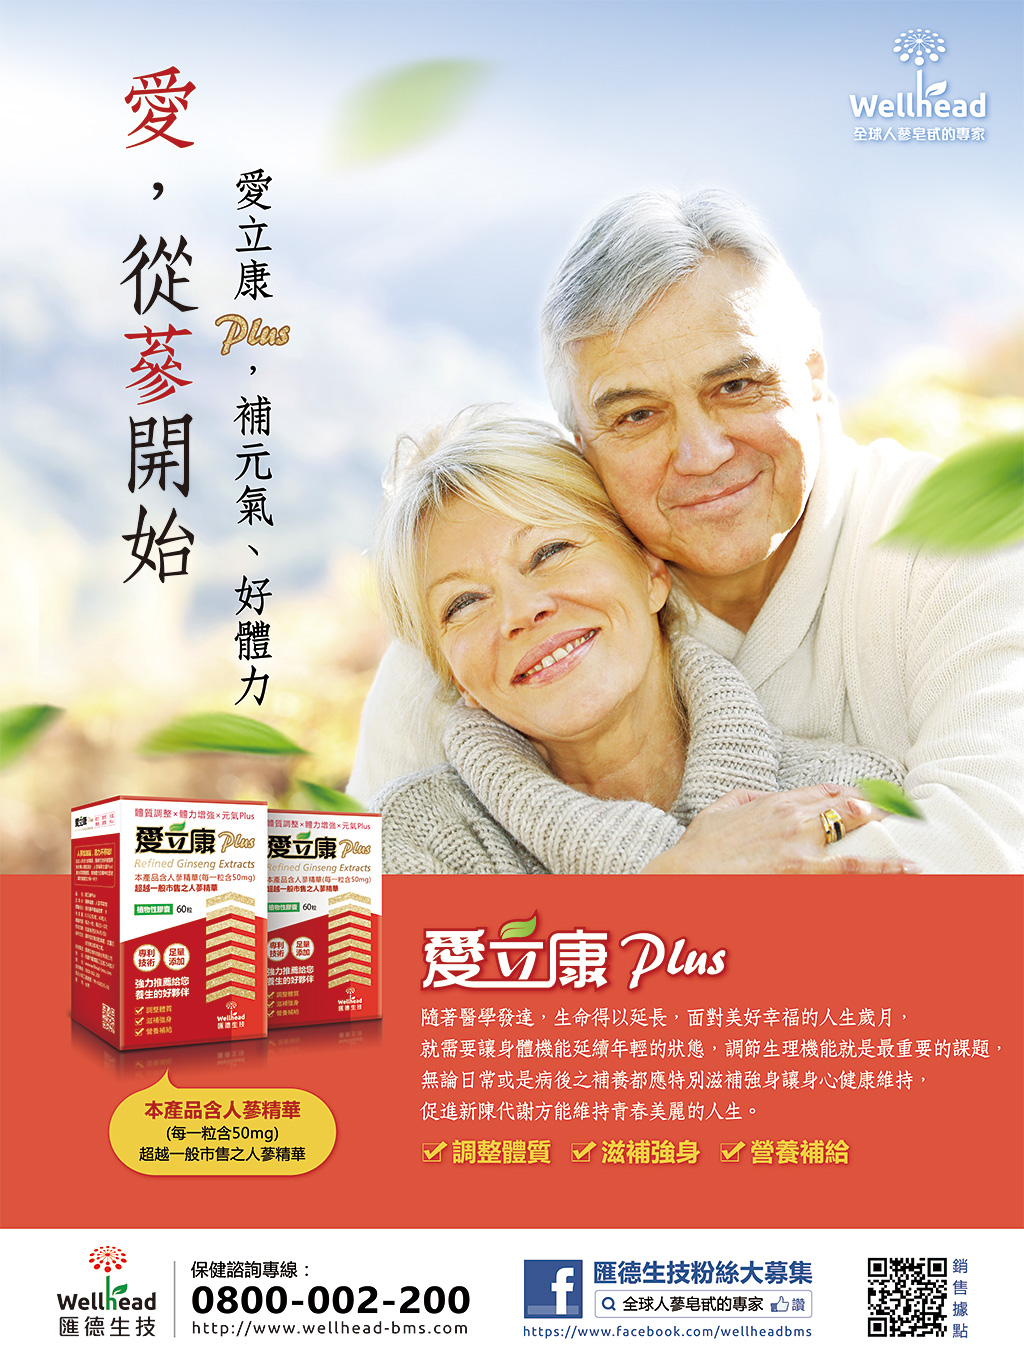 Show your love with the gift of health. Refined Ginseng Extracts-Plus, for vigor, health, and strength!